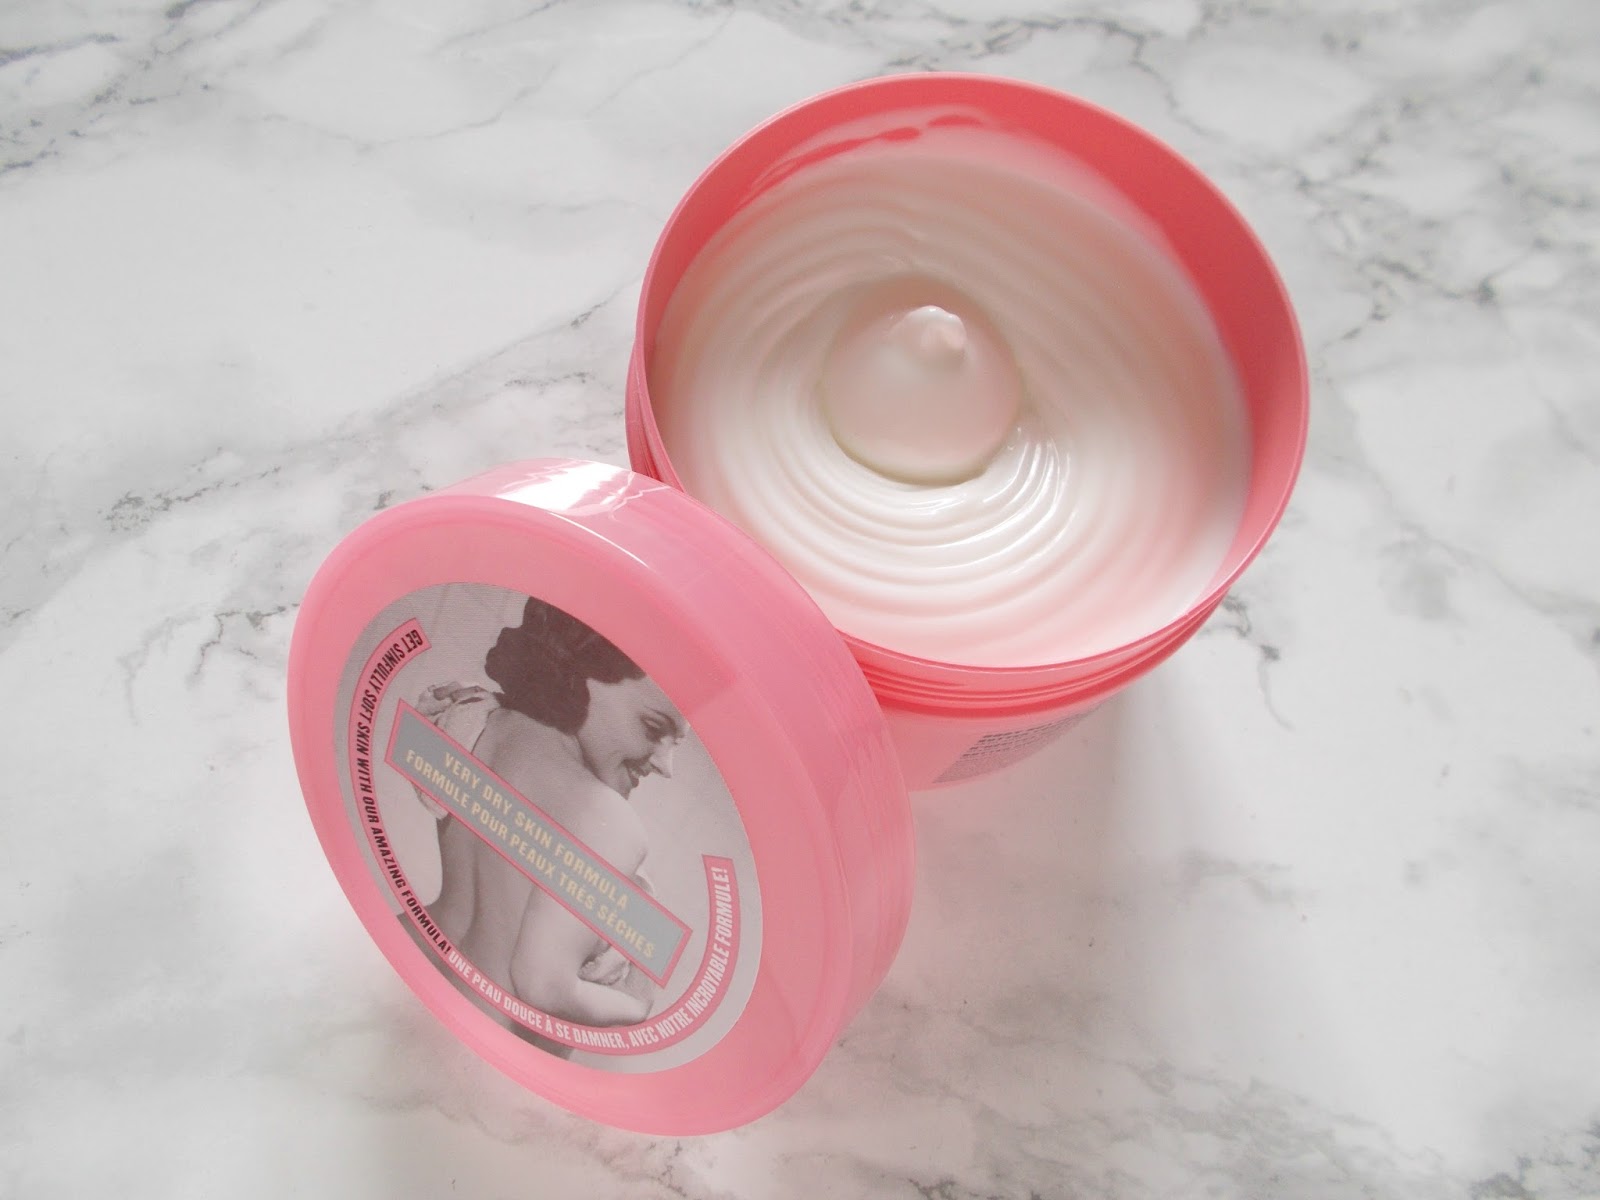 soap and glory the righteous butter moisturiser review